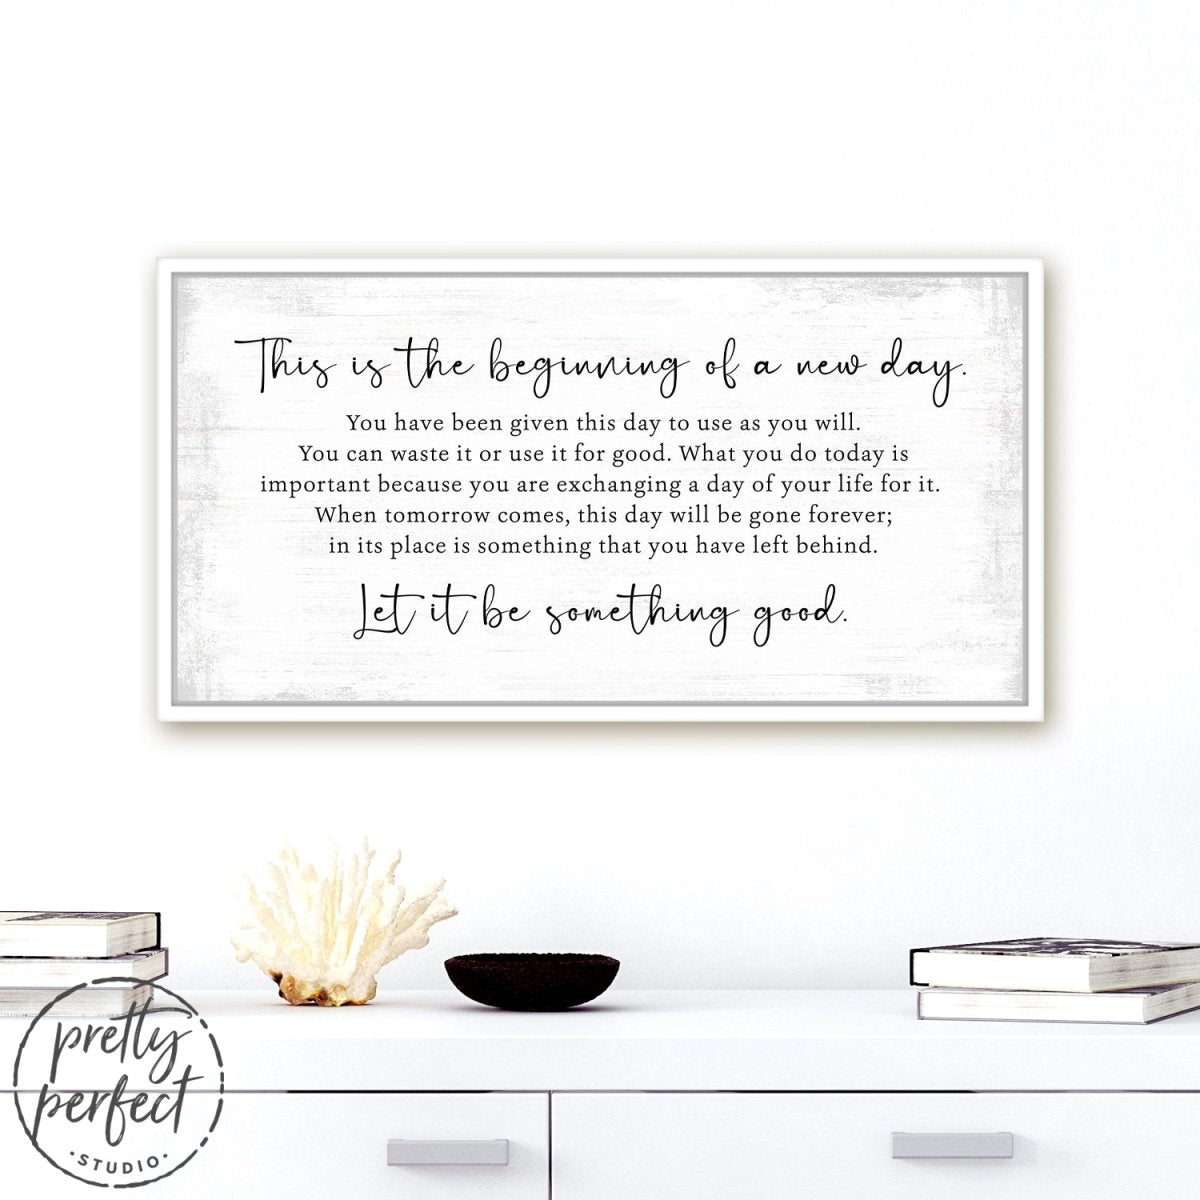 This Is The Beginning Of A New Day Sign Above Table in Living Room - Pretty Perfect Studio